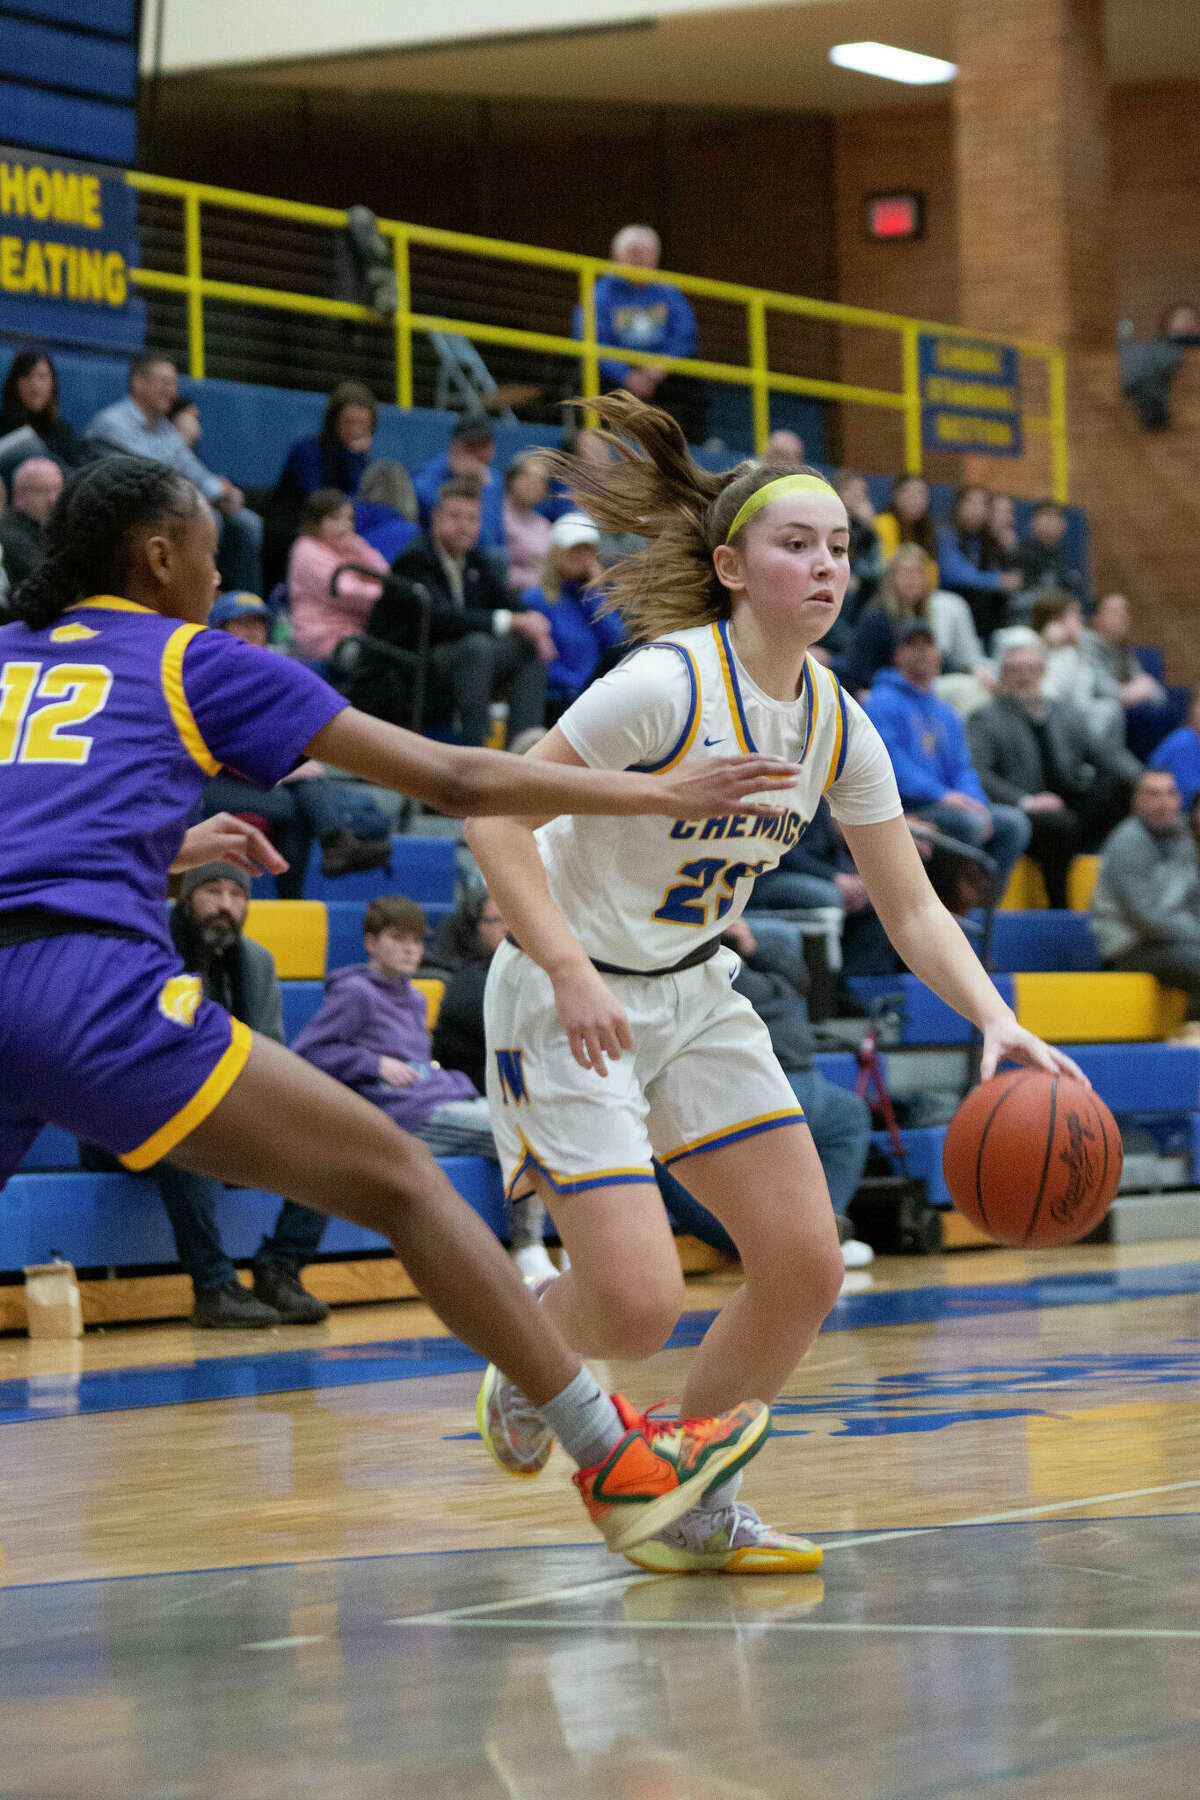 Midland High's Payton Palmer attacks off the dribble during a Feb. 16, 2023 game against Bay City Central. Palmer had 15 points in Tuesday's district quarterfinal win over the Wolves.